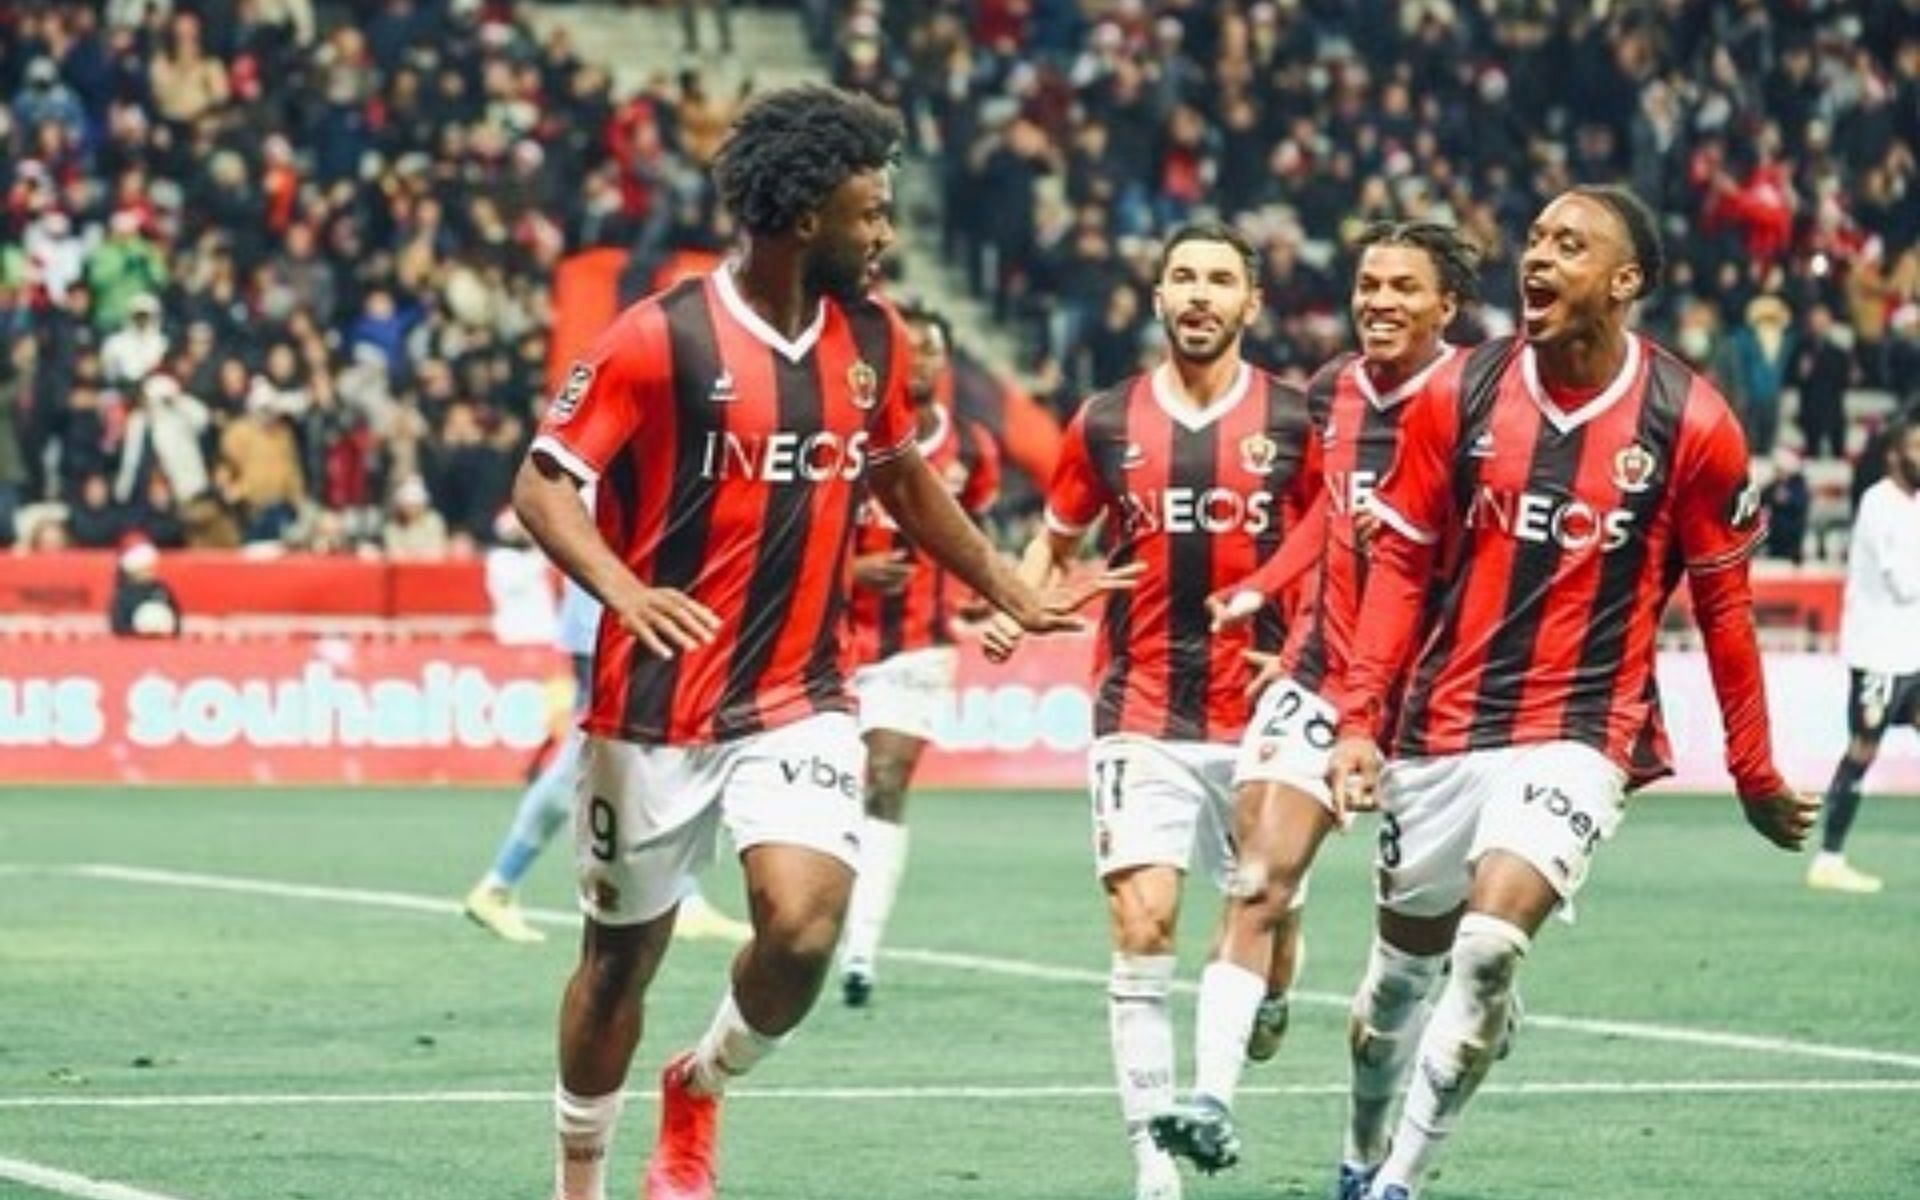 Can Terem Moffi help Nice to defeat Reims this weekend?